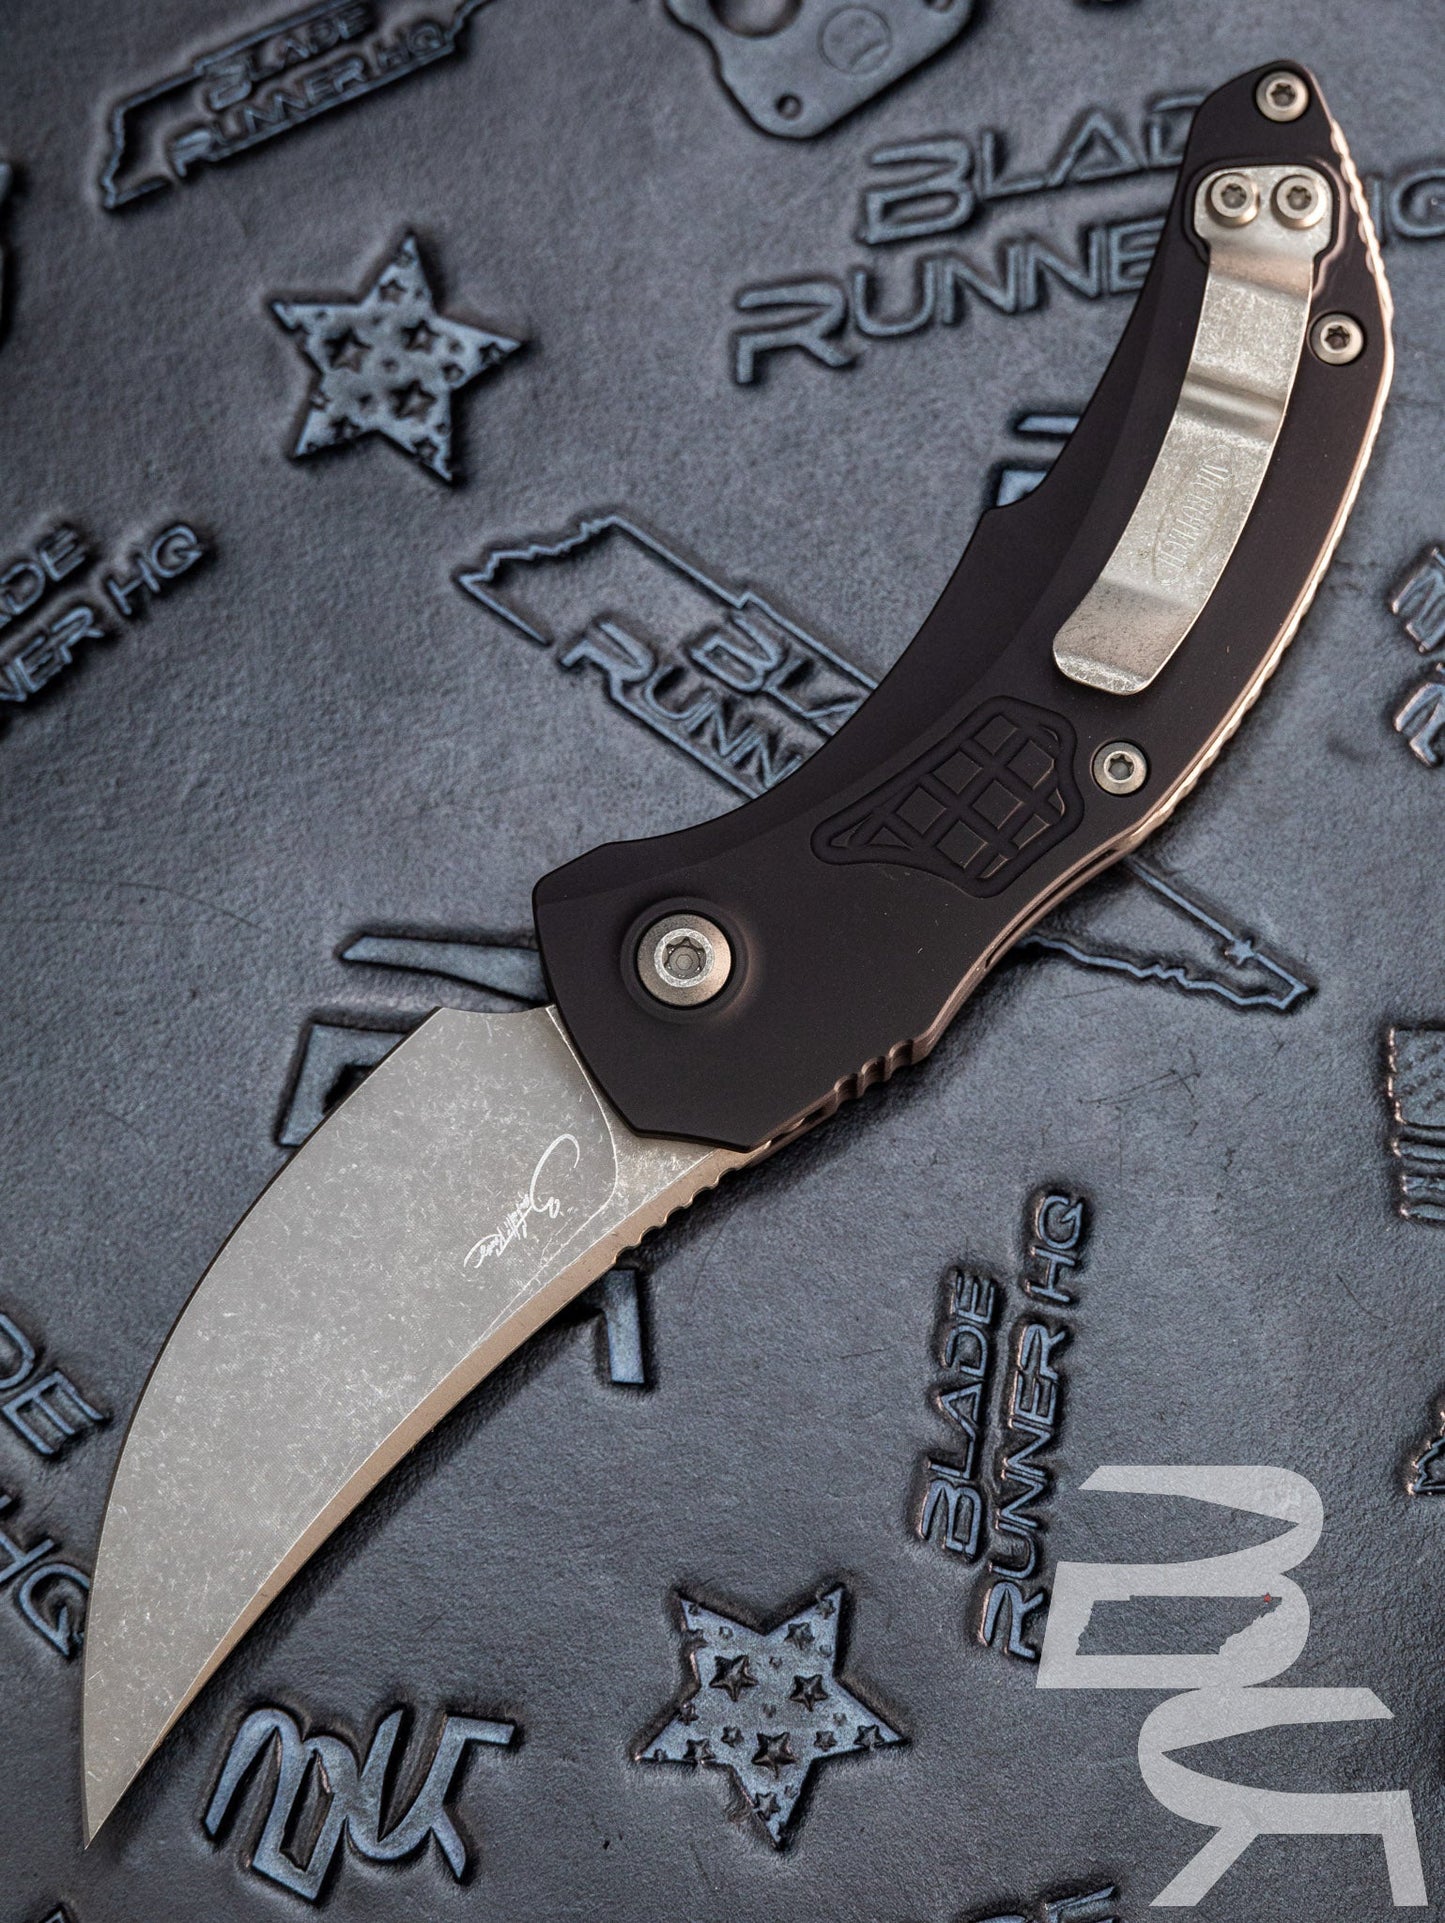 Microtech/Bastinelli Creations 268A-10AP Brachial AUTO Folding Knife 3.5" Apocalyptic Trailing Point Blade, Milled Black Aluminum Handles *